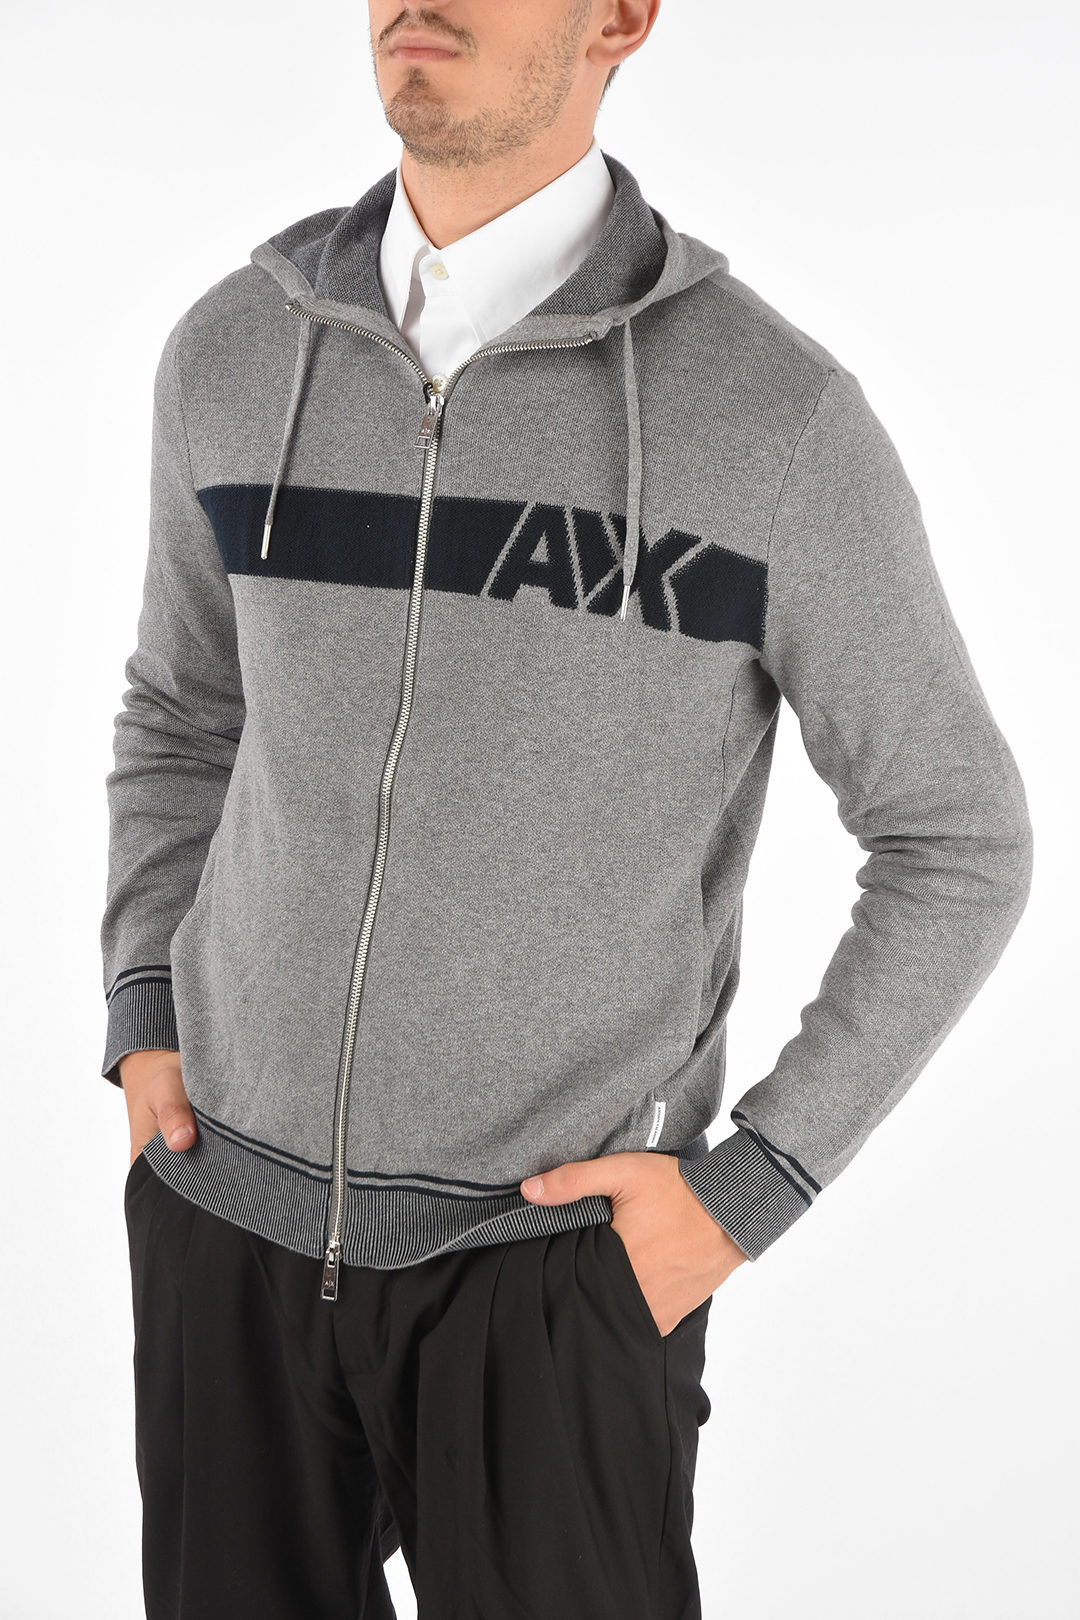 Armani ARMANI EXCHANGE hooded sweater with zip closure men - Glamood Outlet